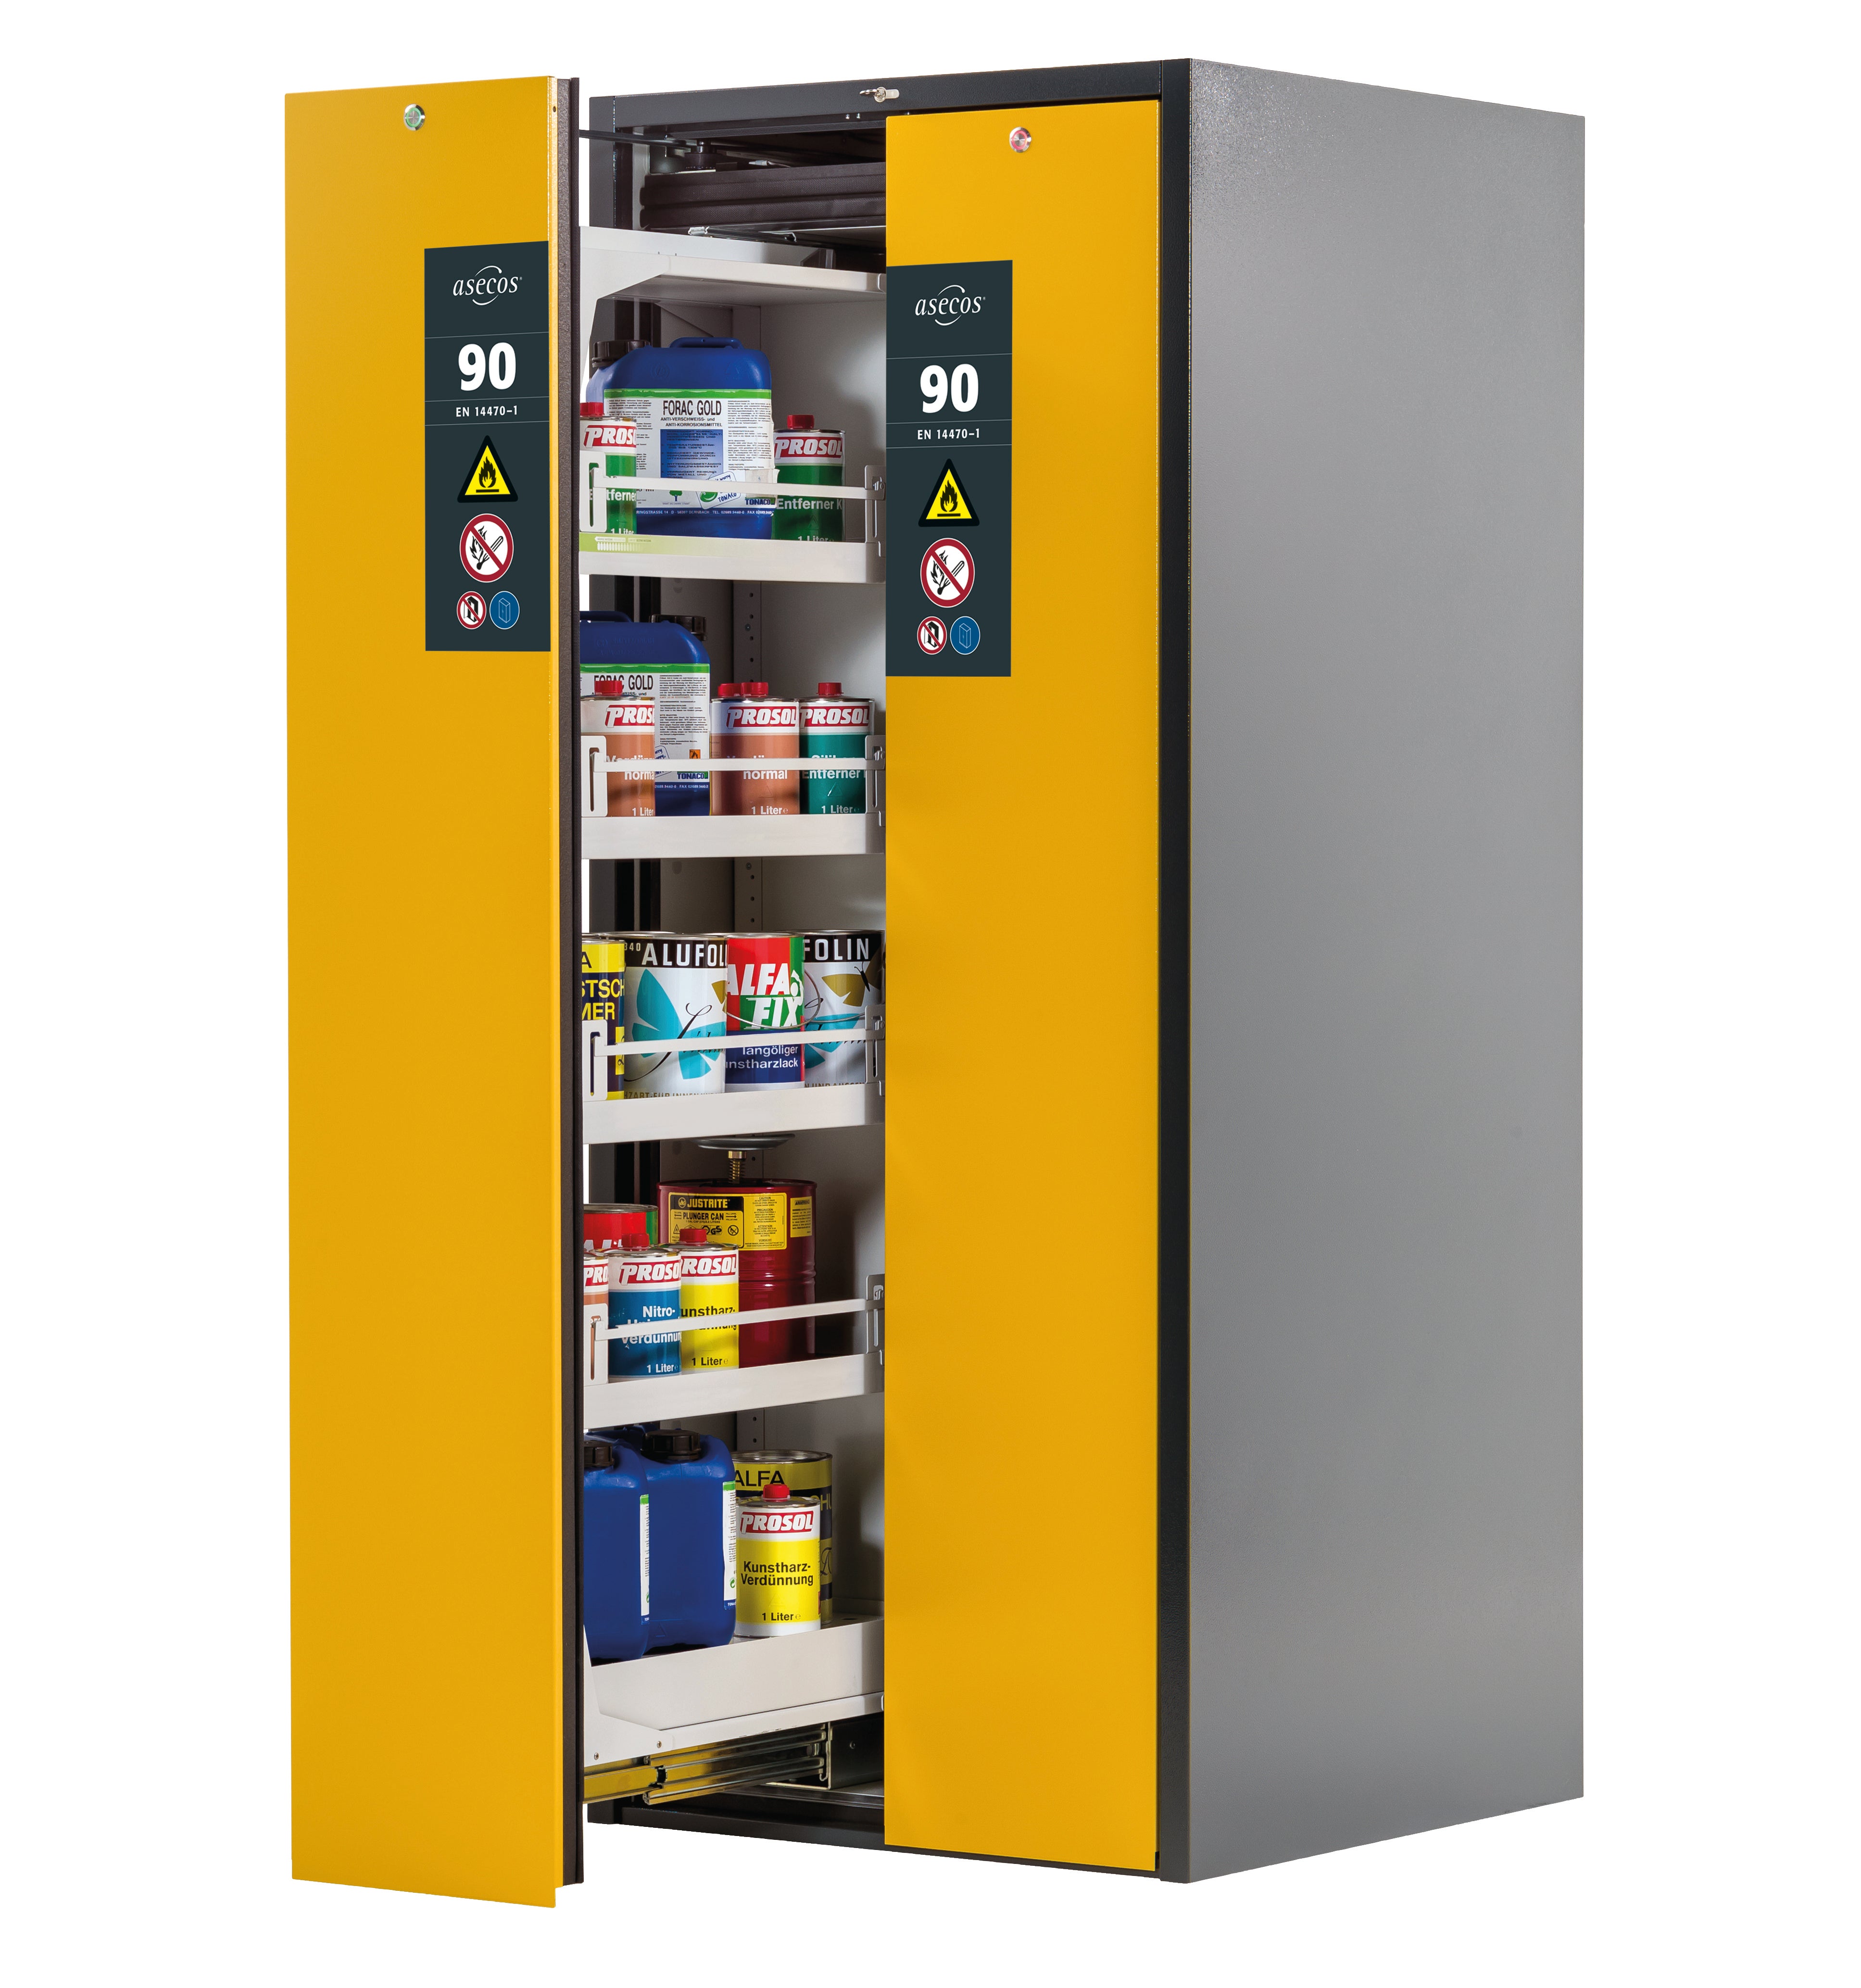 Type 90 safety cabinet V-MOVE-90 model V90.196.081.VDAC:0013 in safety yellow RAL 1004 with 4x standard tray base (sheet steel)